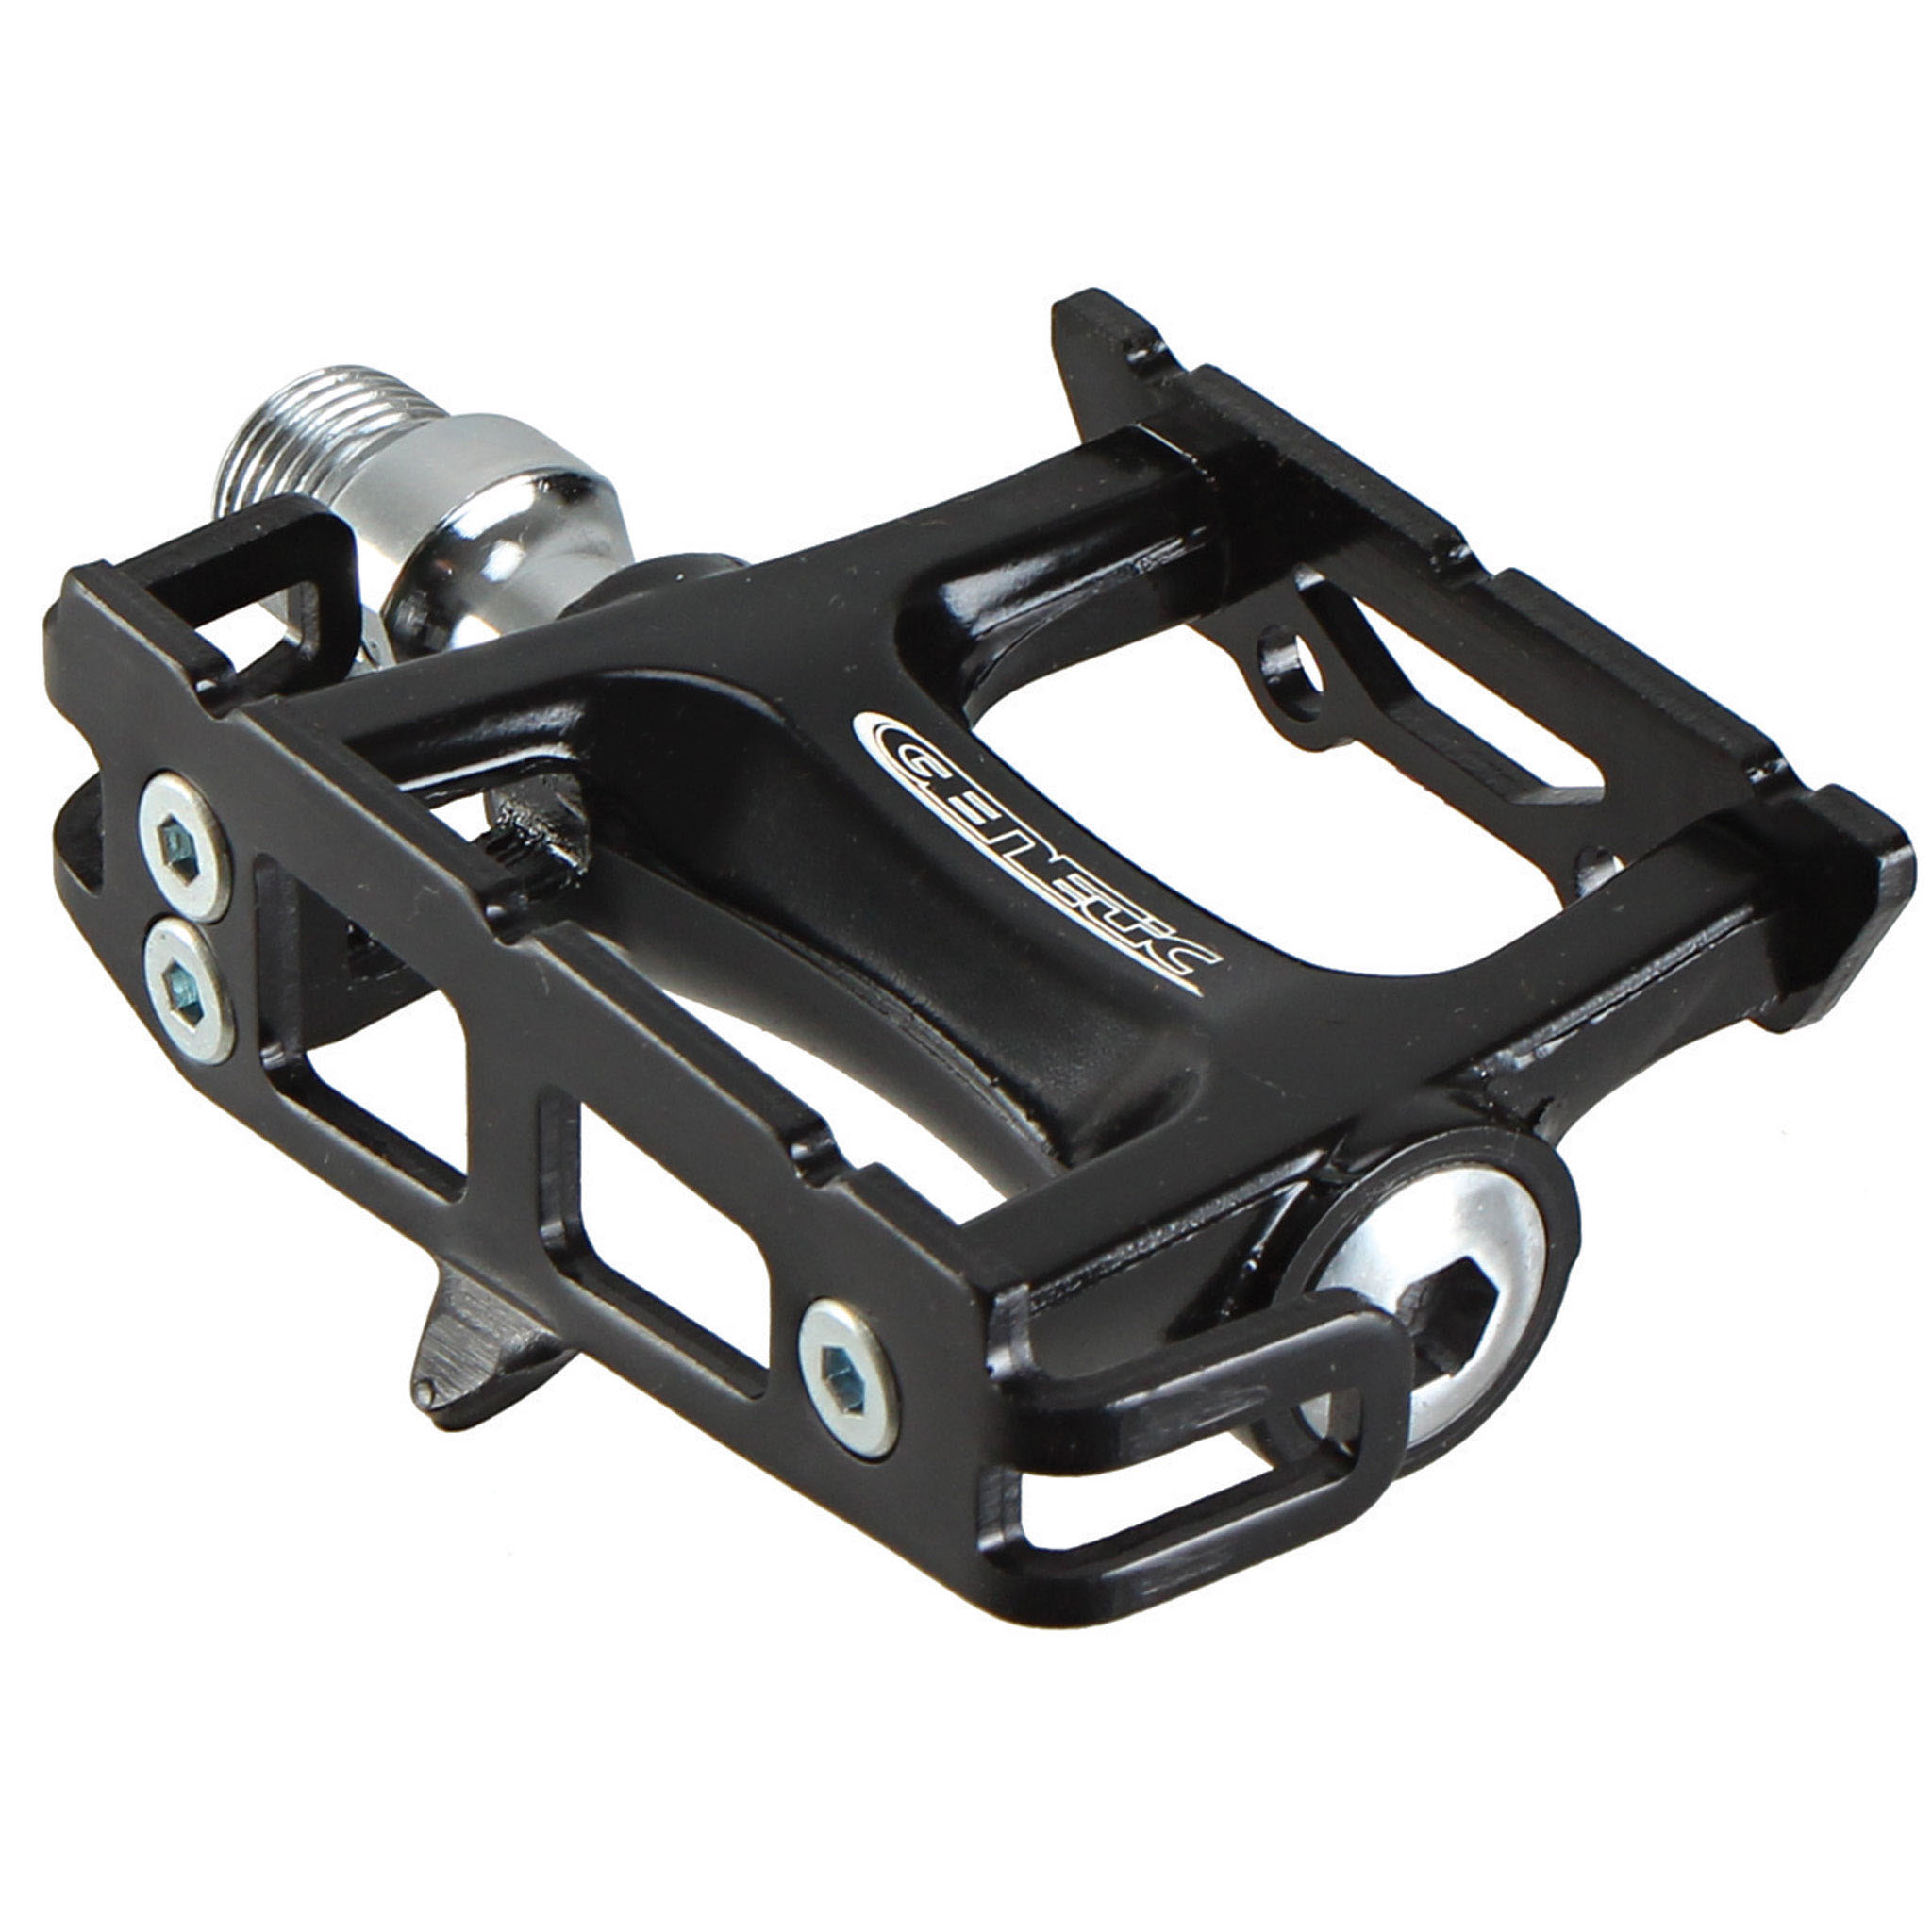 Genetic Pro Track Pedals, Black with Black Cage